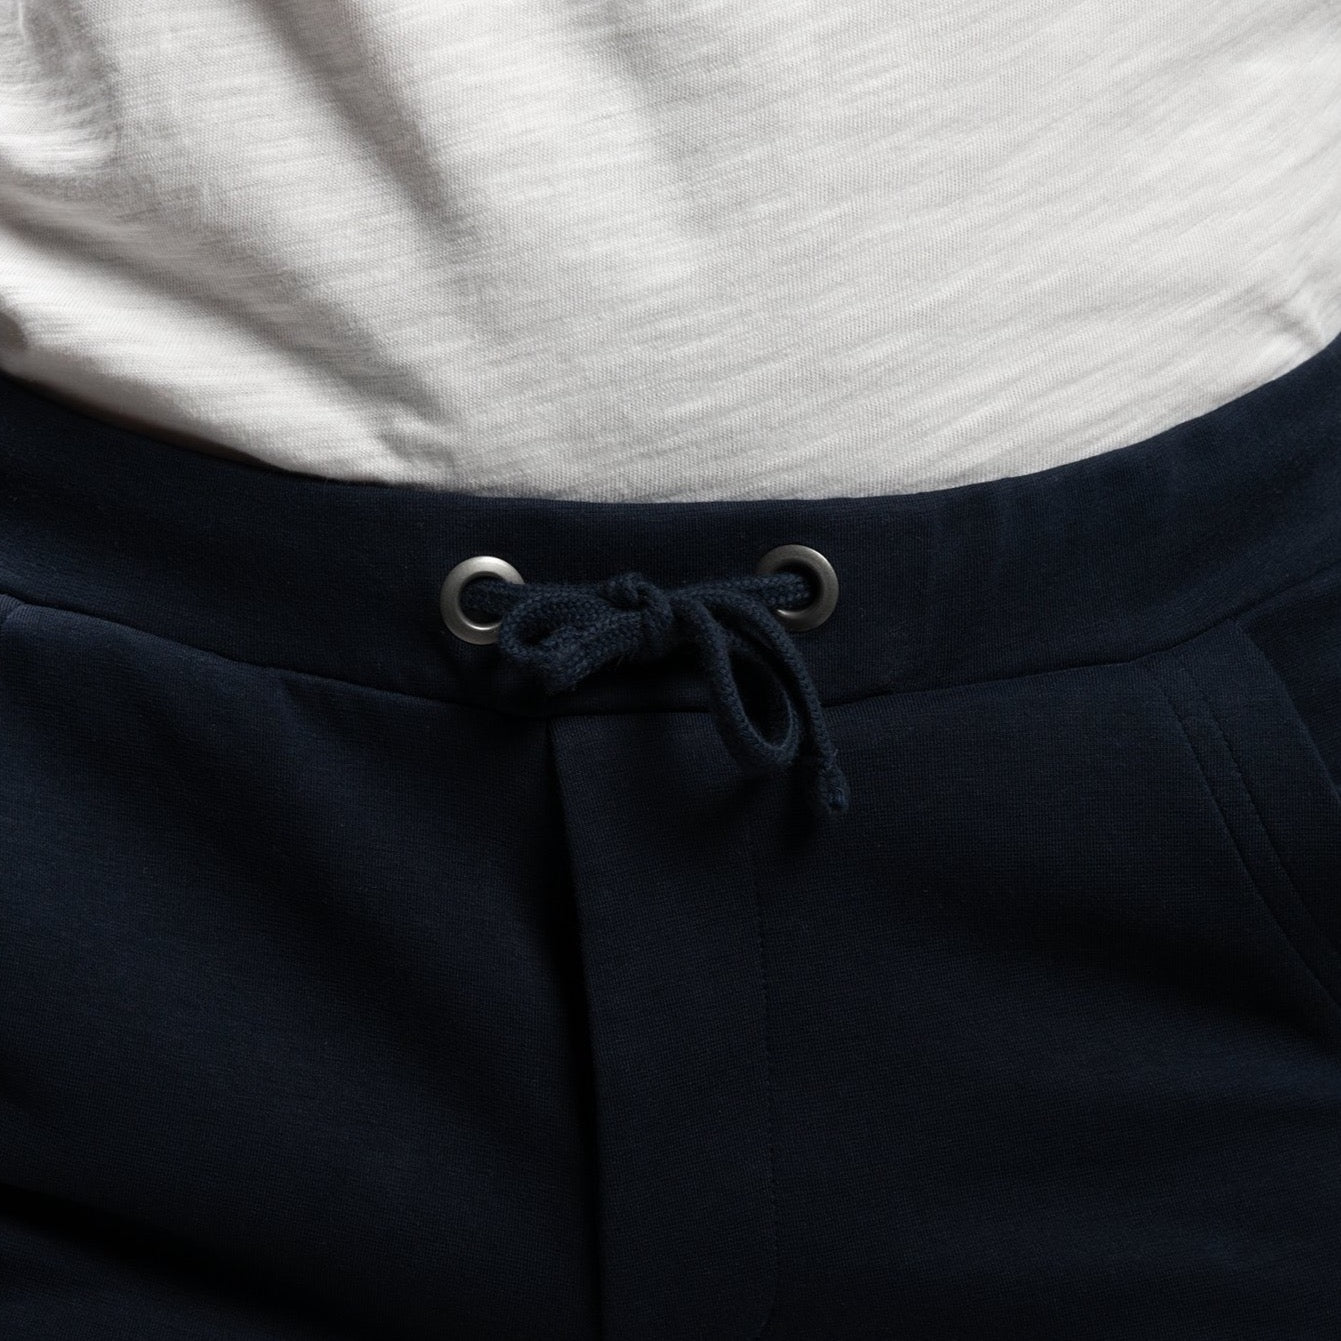 All Day Sweatpants - Navy